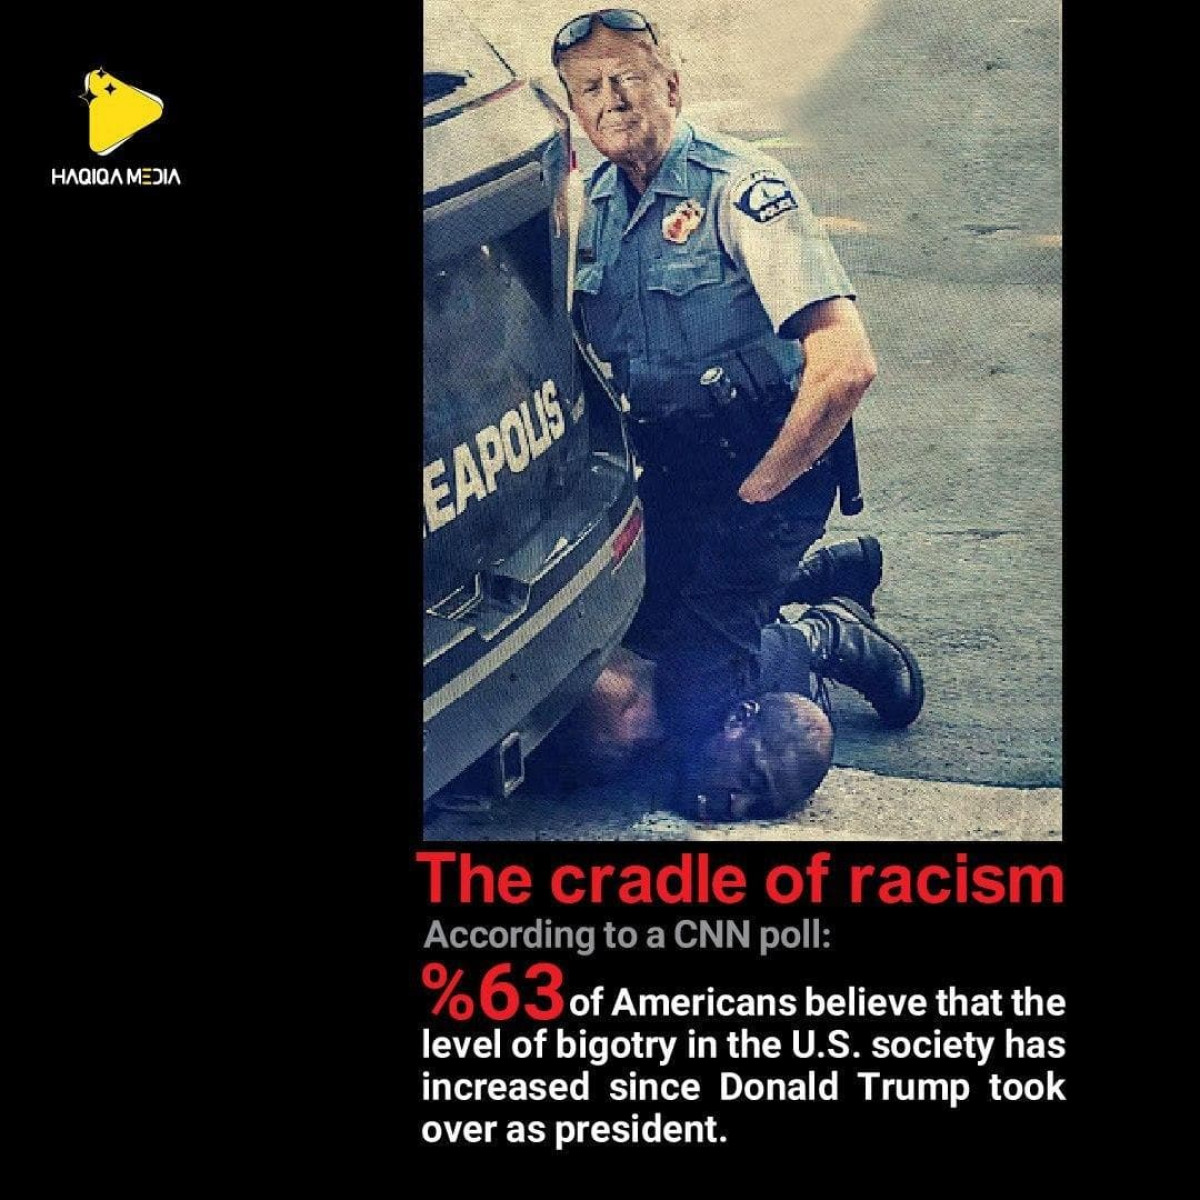 The cradle of racism